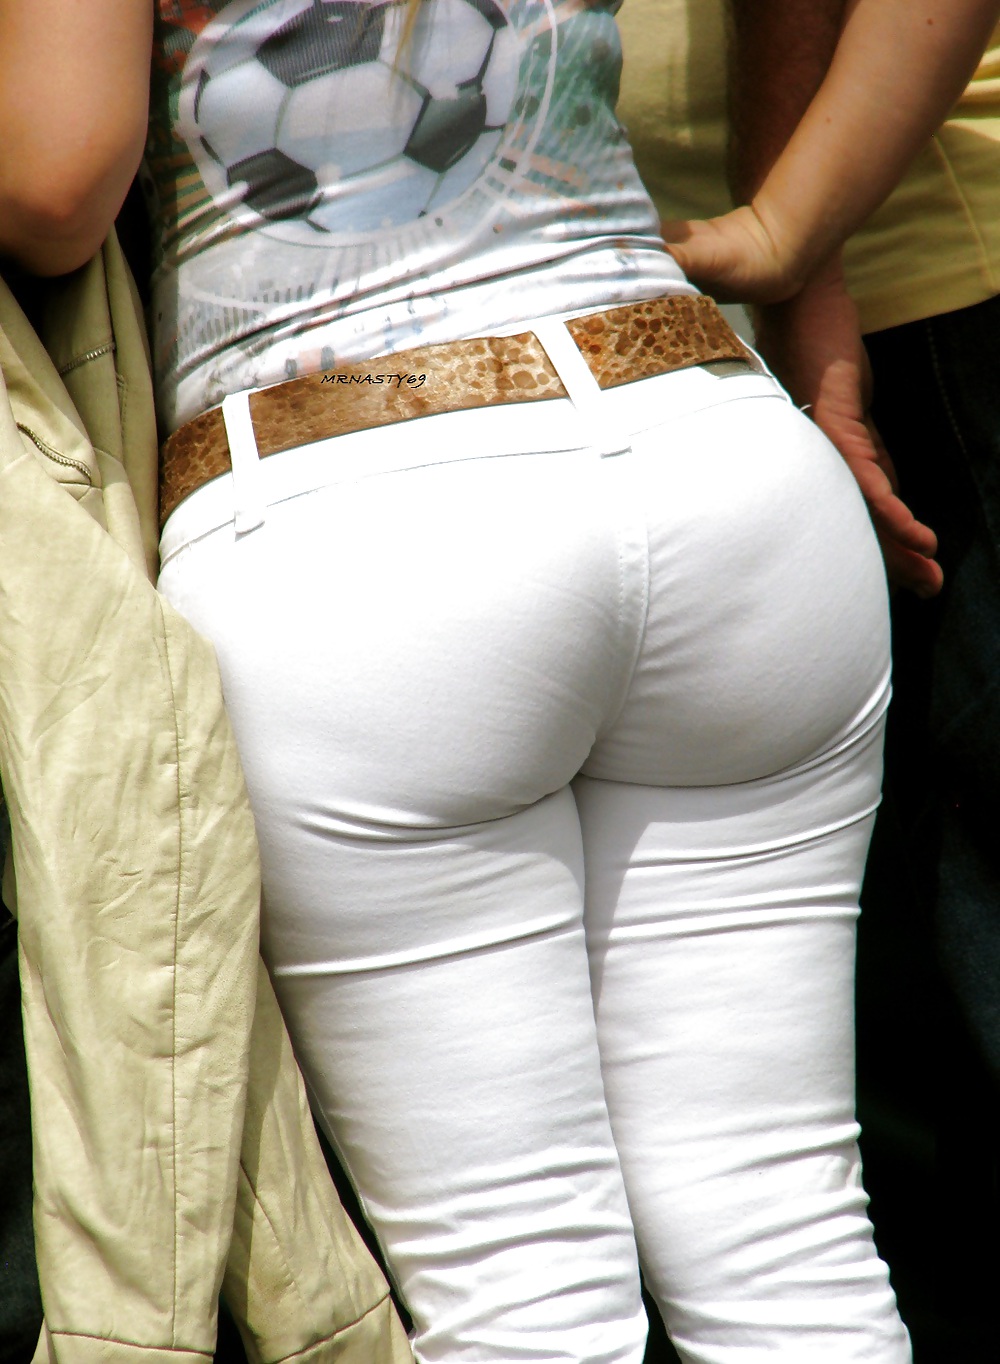 Wife In Tight Jeans #15 #15989573